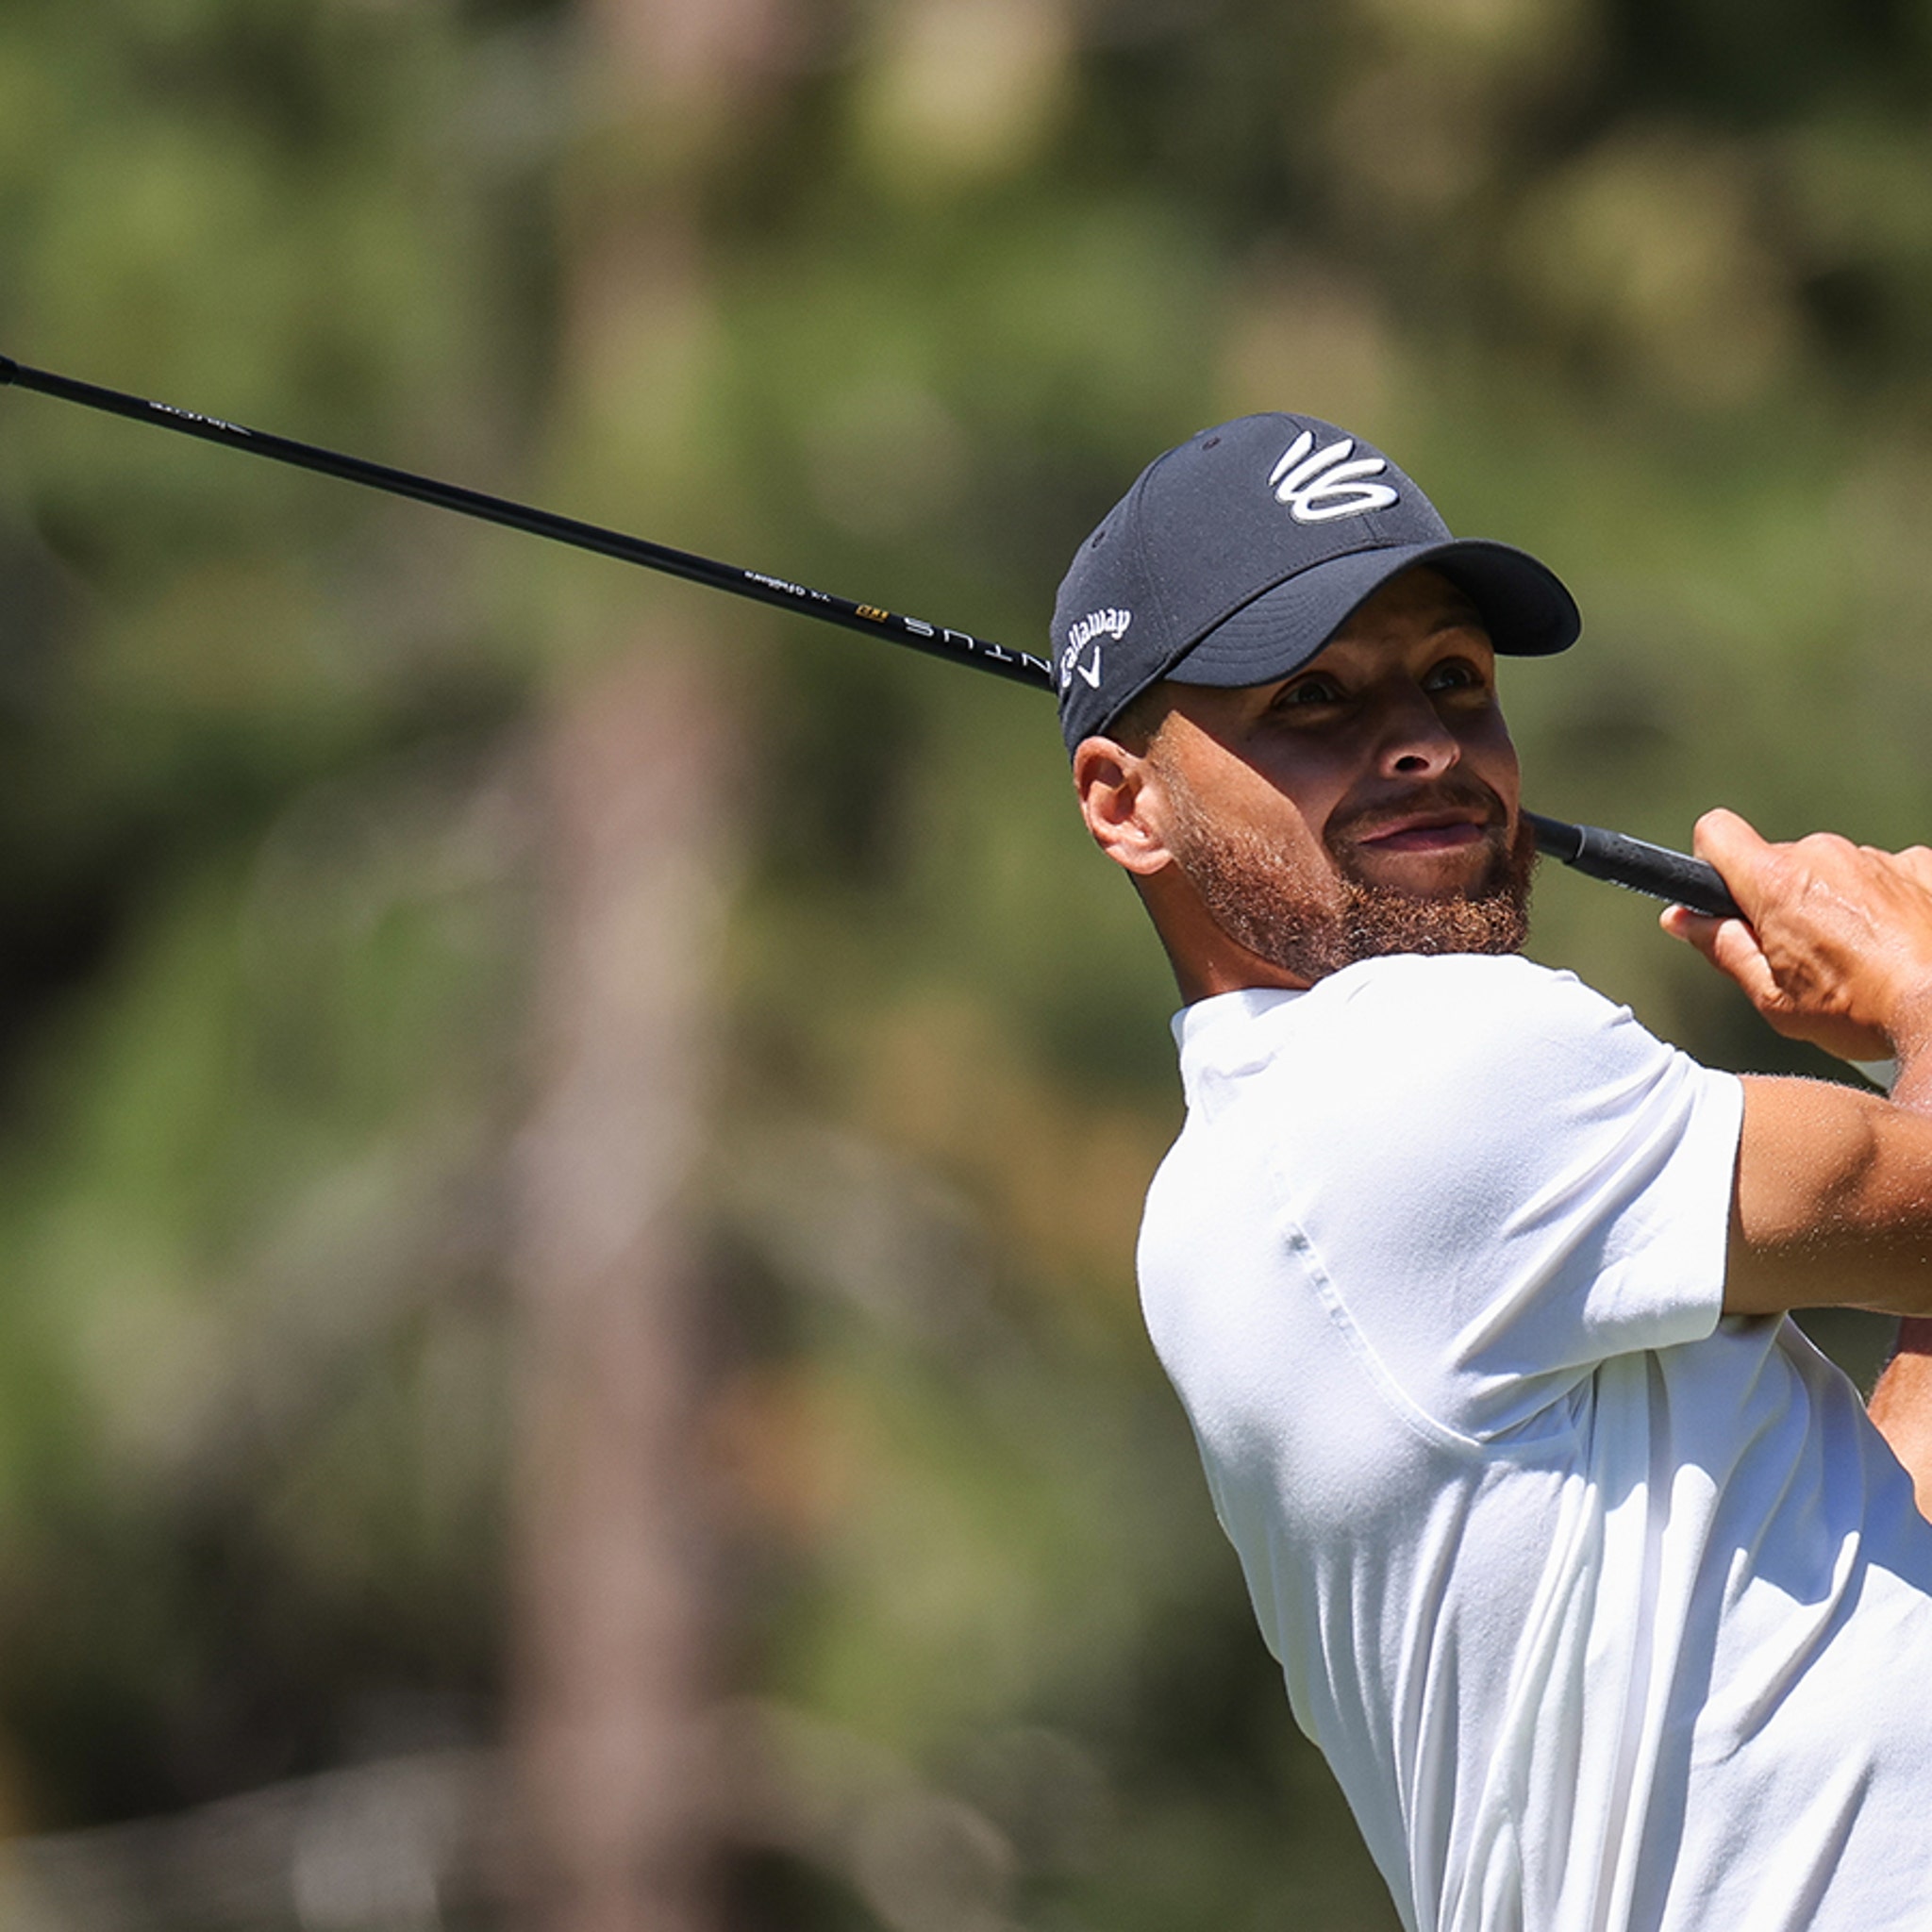 Steph Curry Sinks a Hole-in-One at ACC Golf Tournament in Tahoe